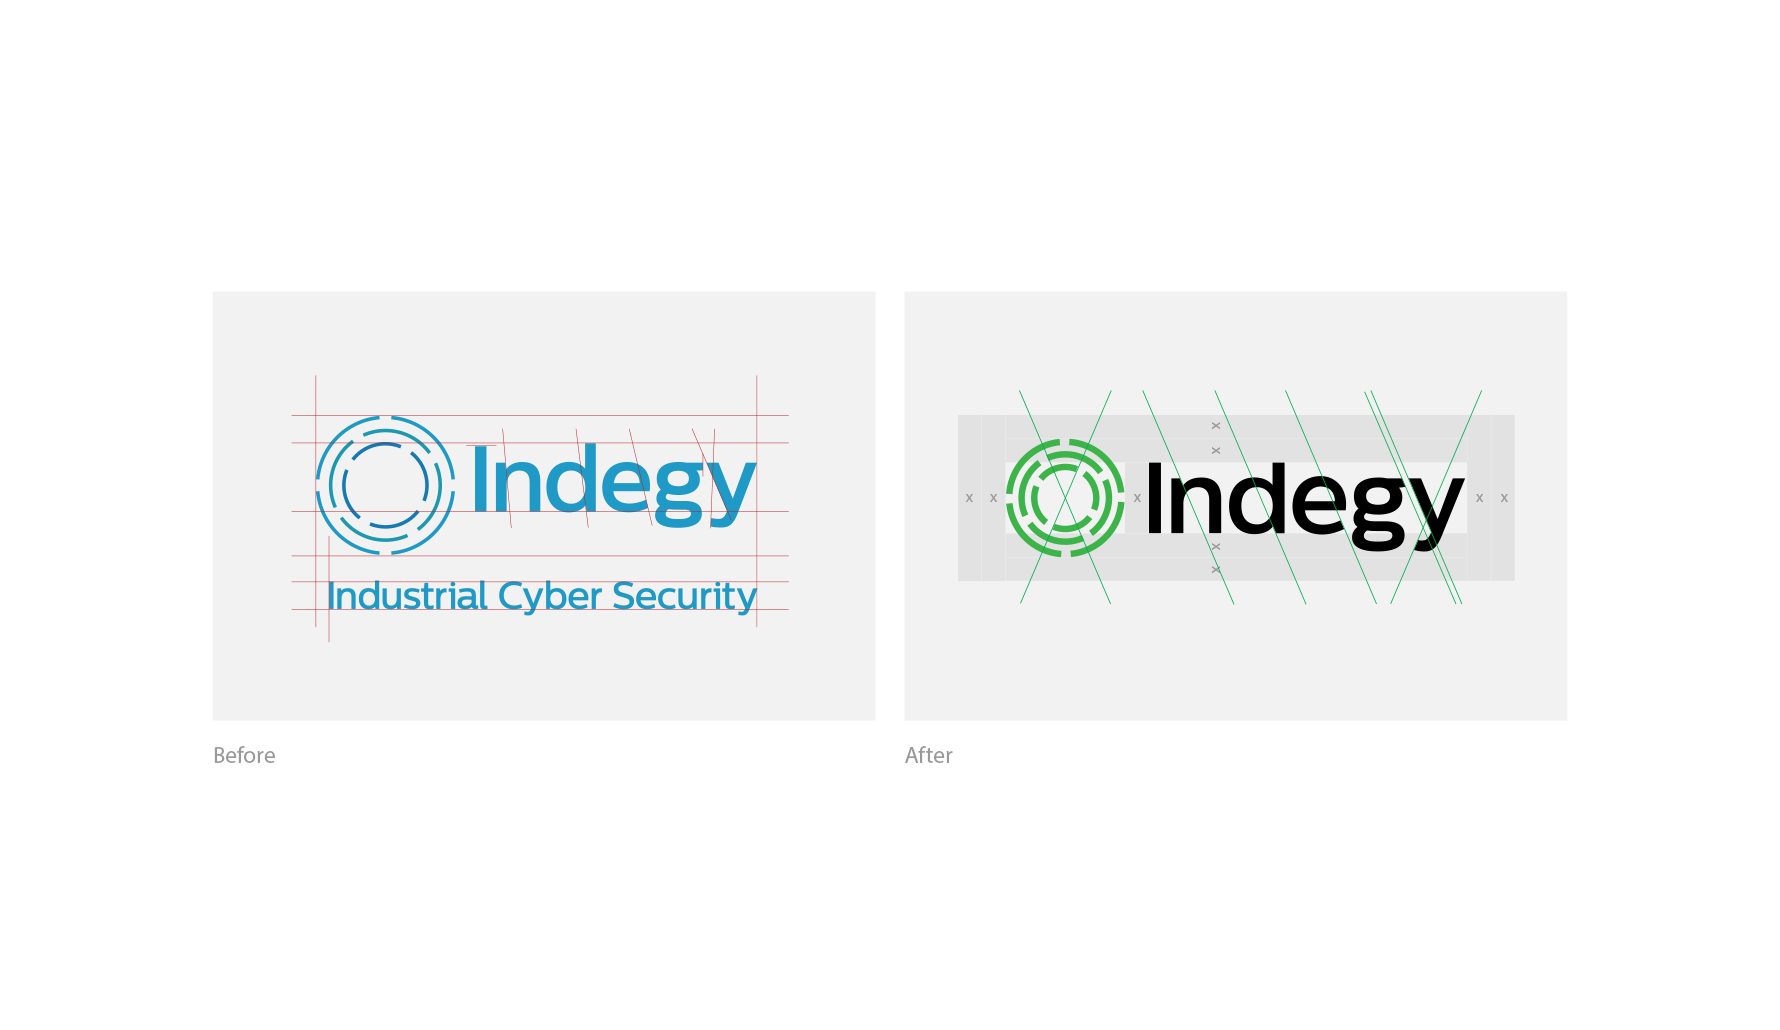 Indegy Brand Update & Guidelines side-by-side comparison of before and after old logo vs new logo